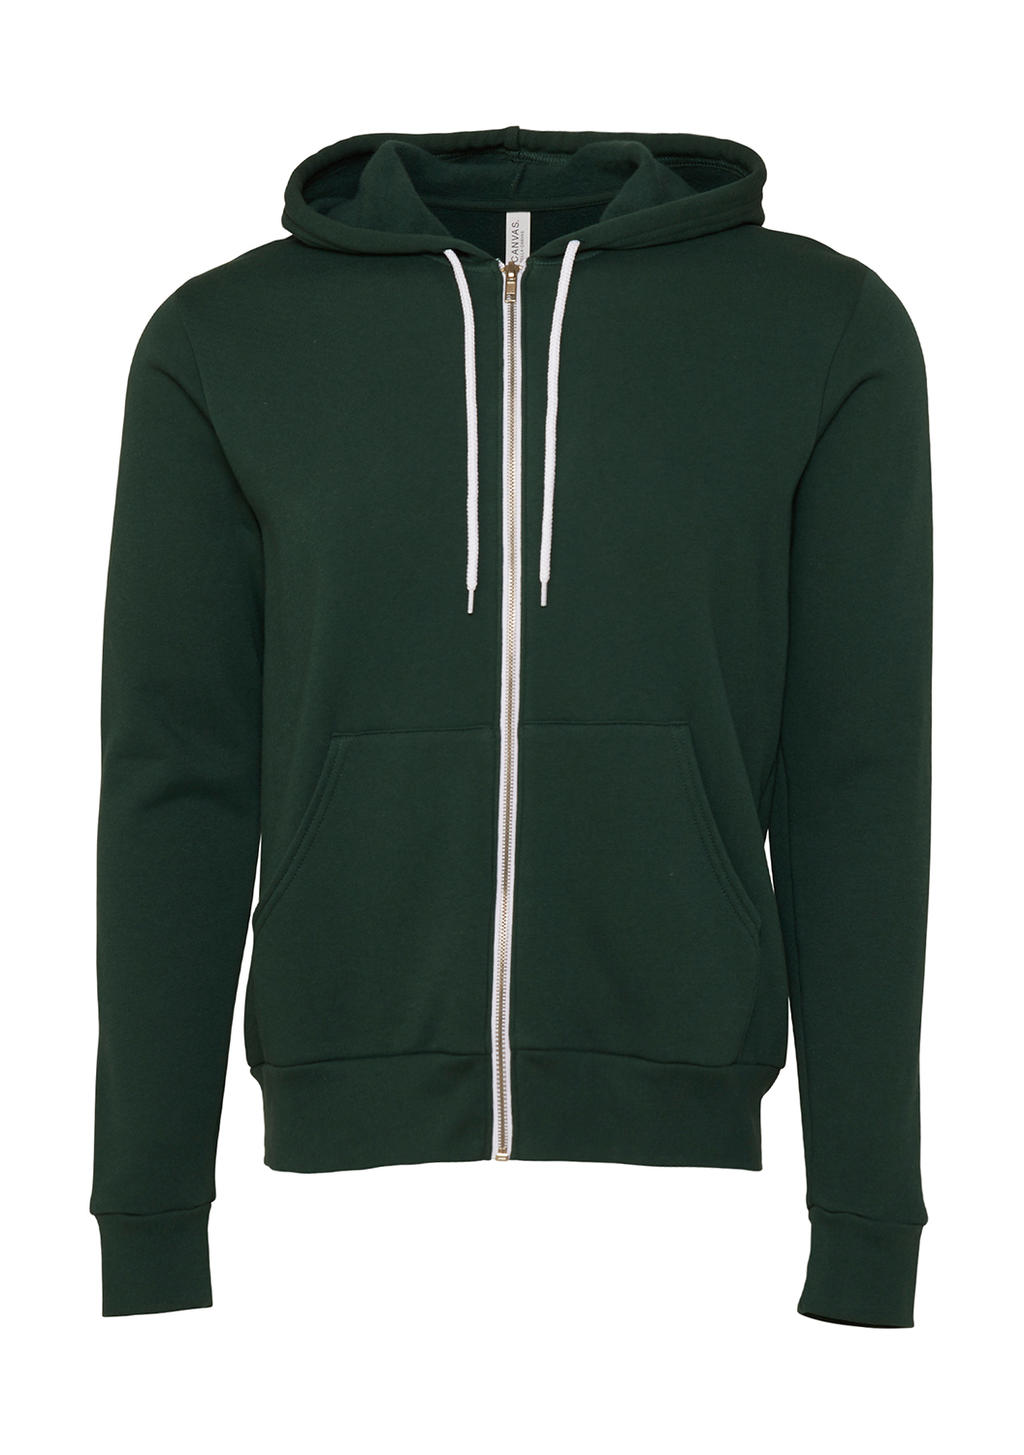  Unisex Poly-Cotton Full Zip Hoodie in Farbe Forest